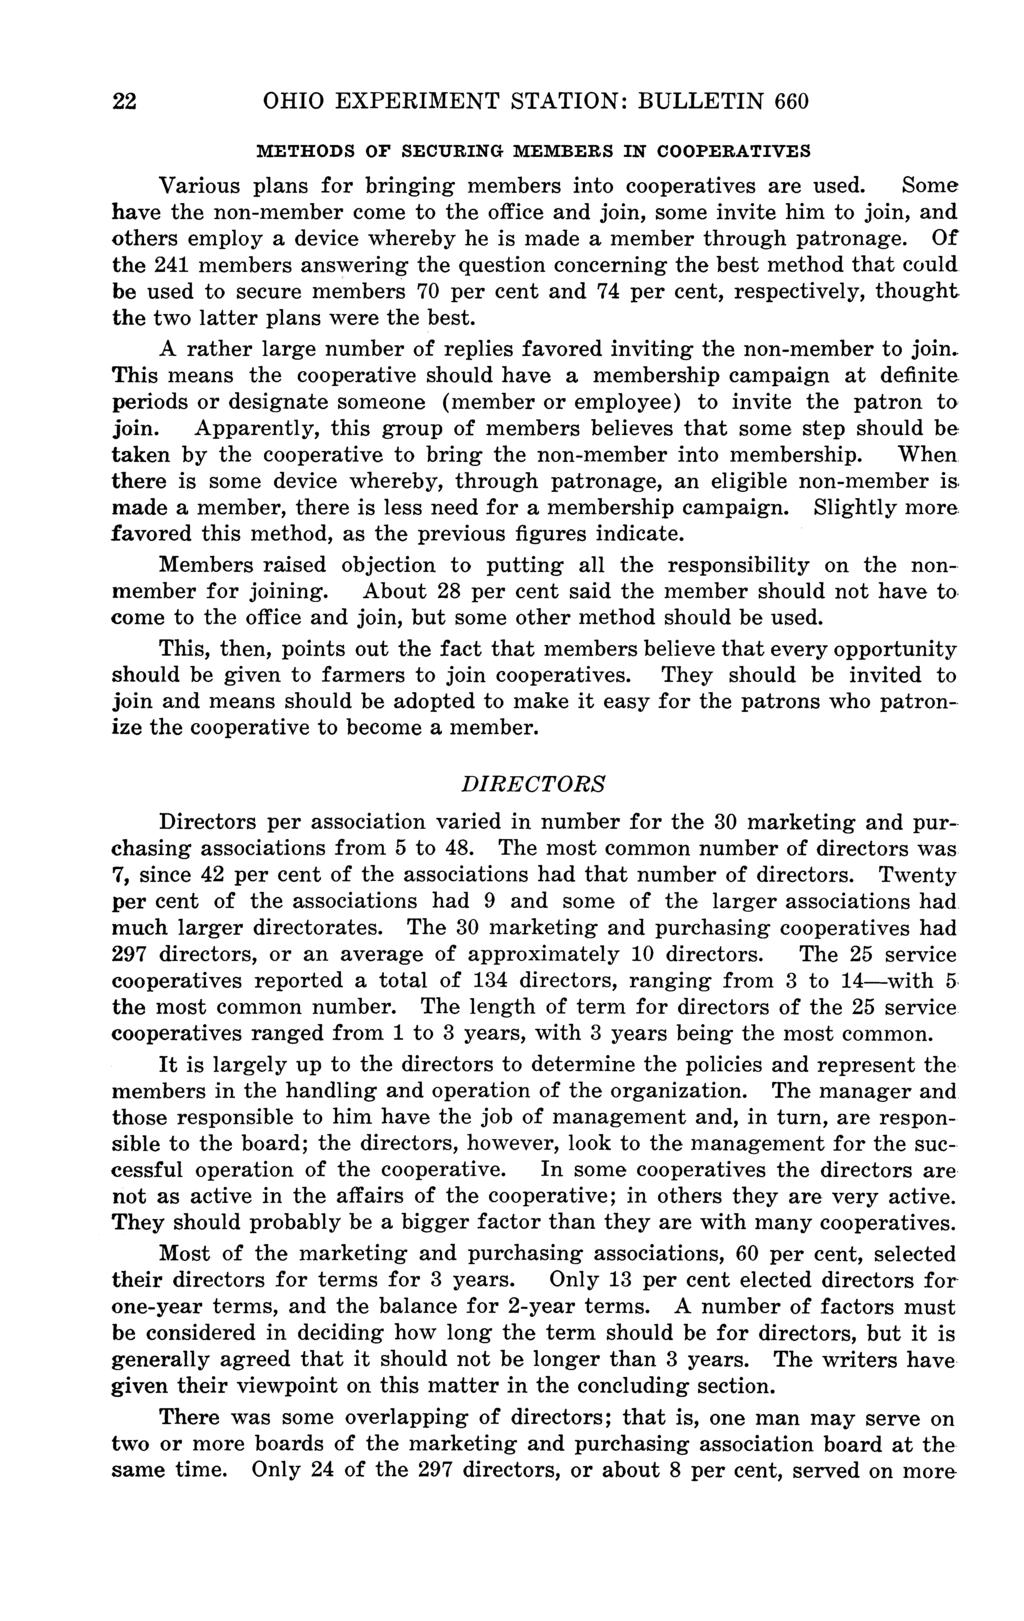 22 OHIO EXPERIMENT STATION: BULLETIN 660 METHODS OF SECURING MEMBERS IN COOPERATIVES Various plans for bringing members into cooperatives are used.